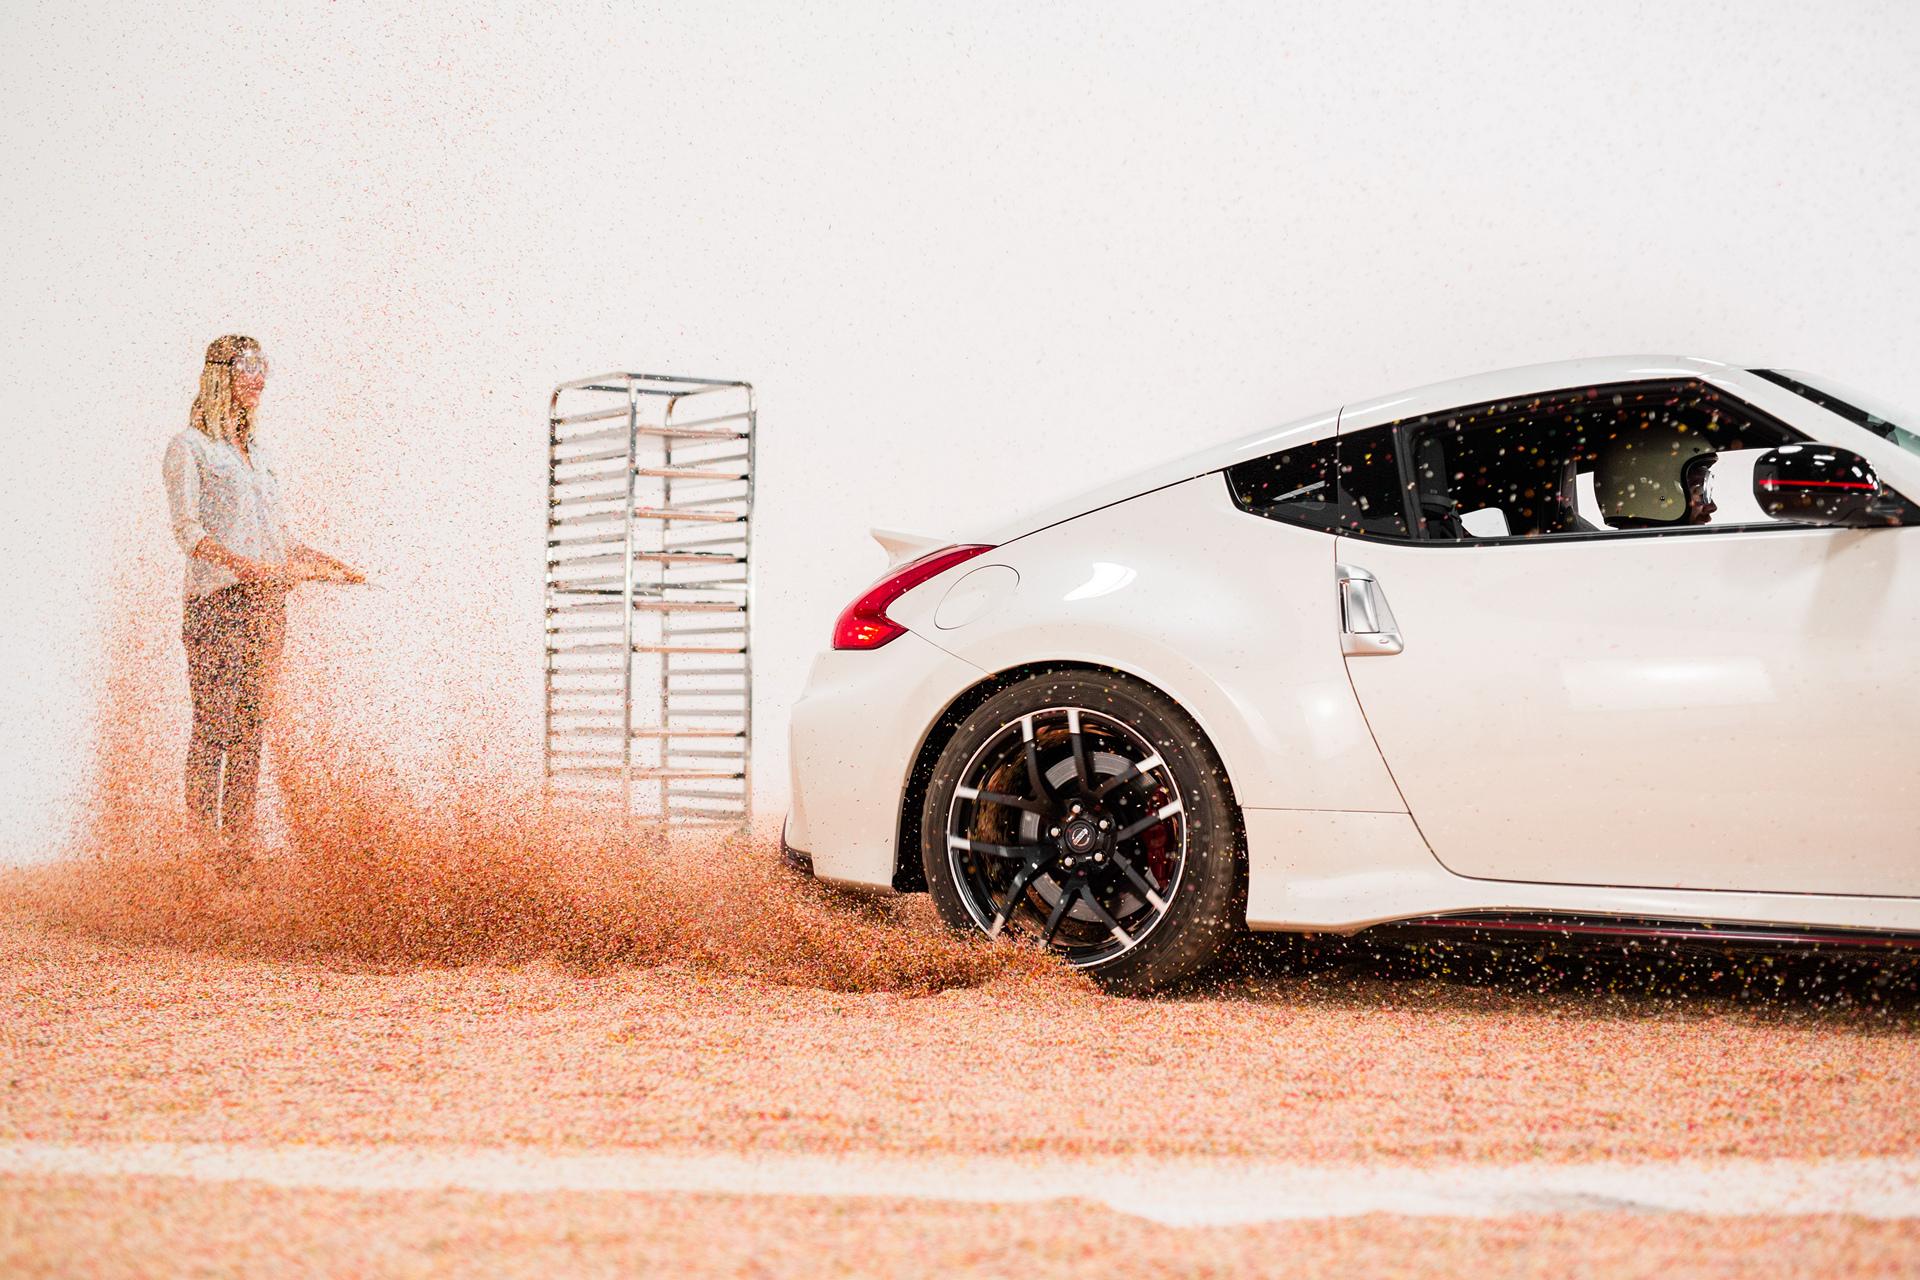 How to make a donut, by the Nissan 370Z NISMO © Nissan Motor Co., Ltd.